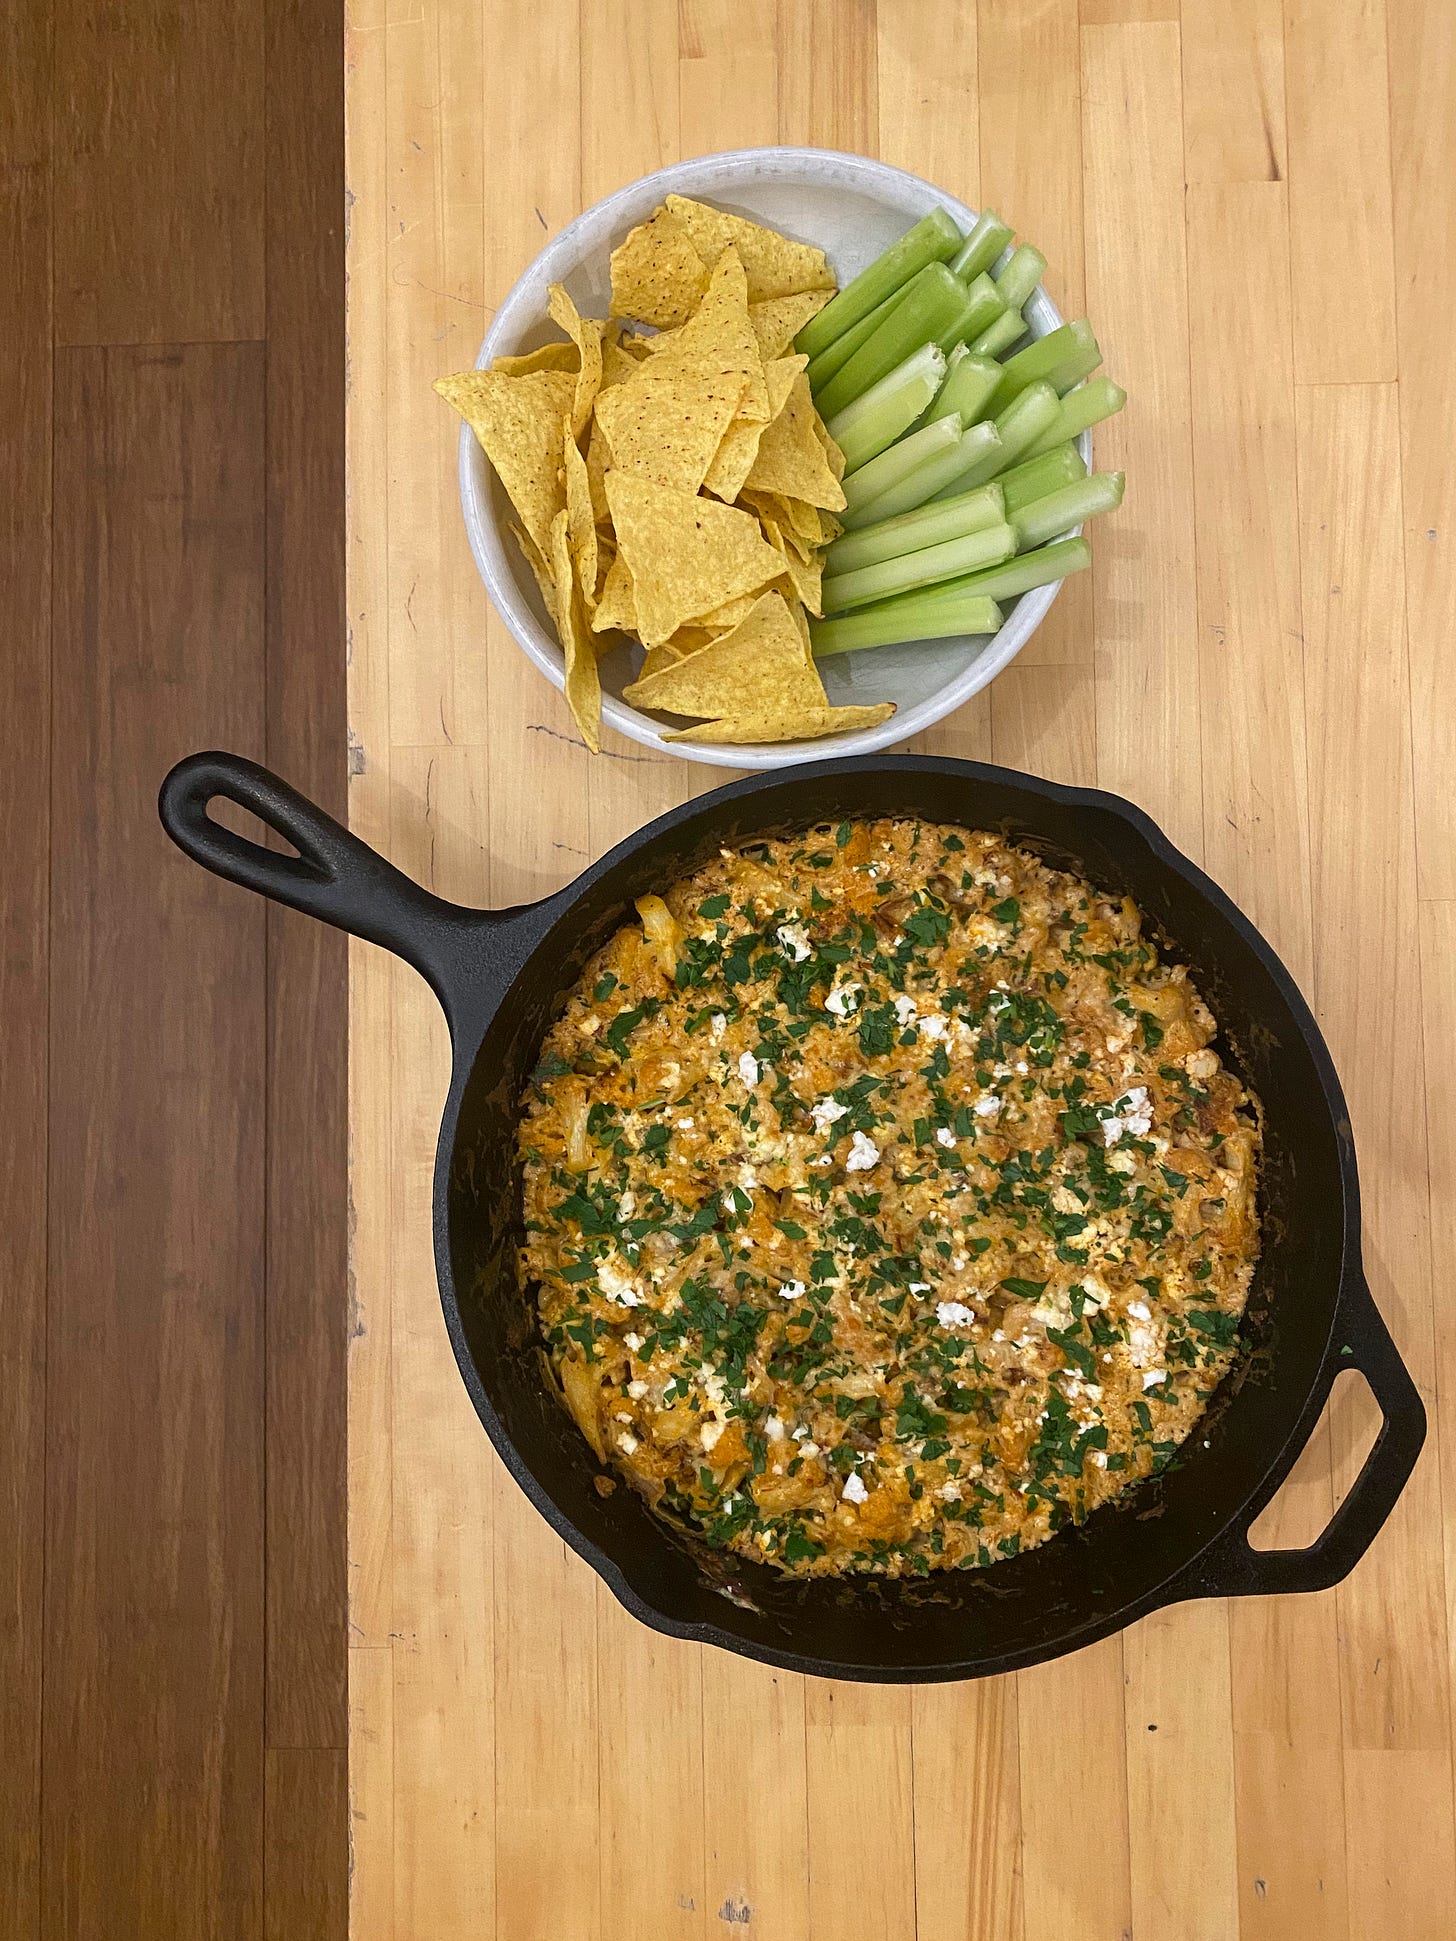 From above, on a light wood coffee table, a cast iron pan of the dip described above, a burnt orange colour made creamy with cheese. On top are pieces of feta and sprinkles of parsley. Above it is a white bowl with tortilla chips on one side and celery sticks on the other.